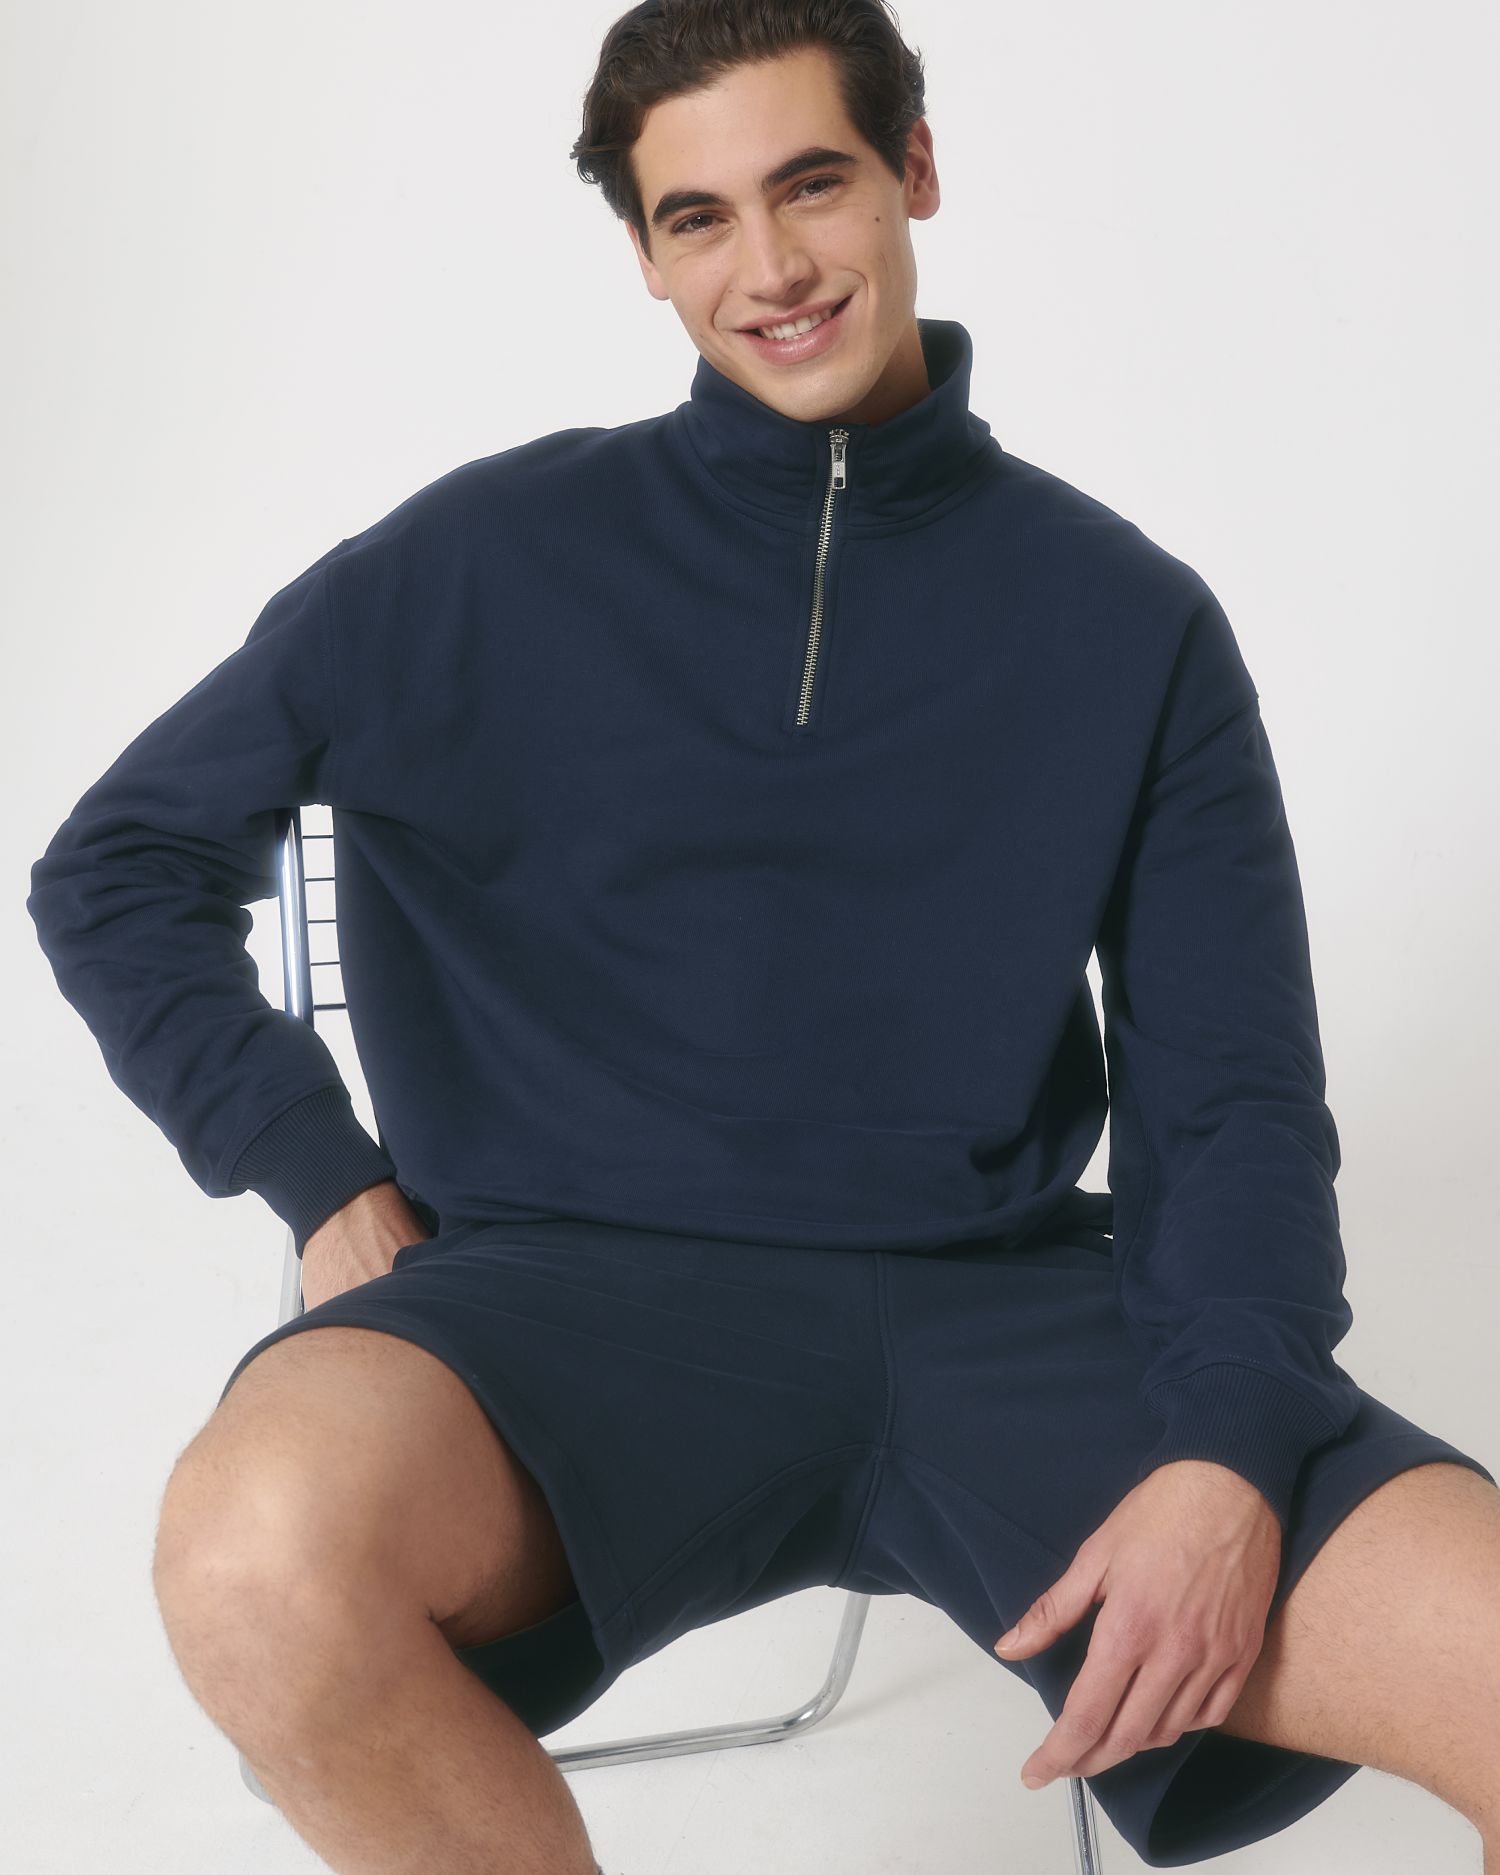 Crew neck sweatshirts Miller Dry in Farbe French Navy